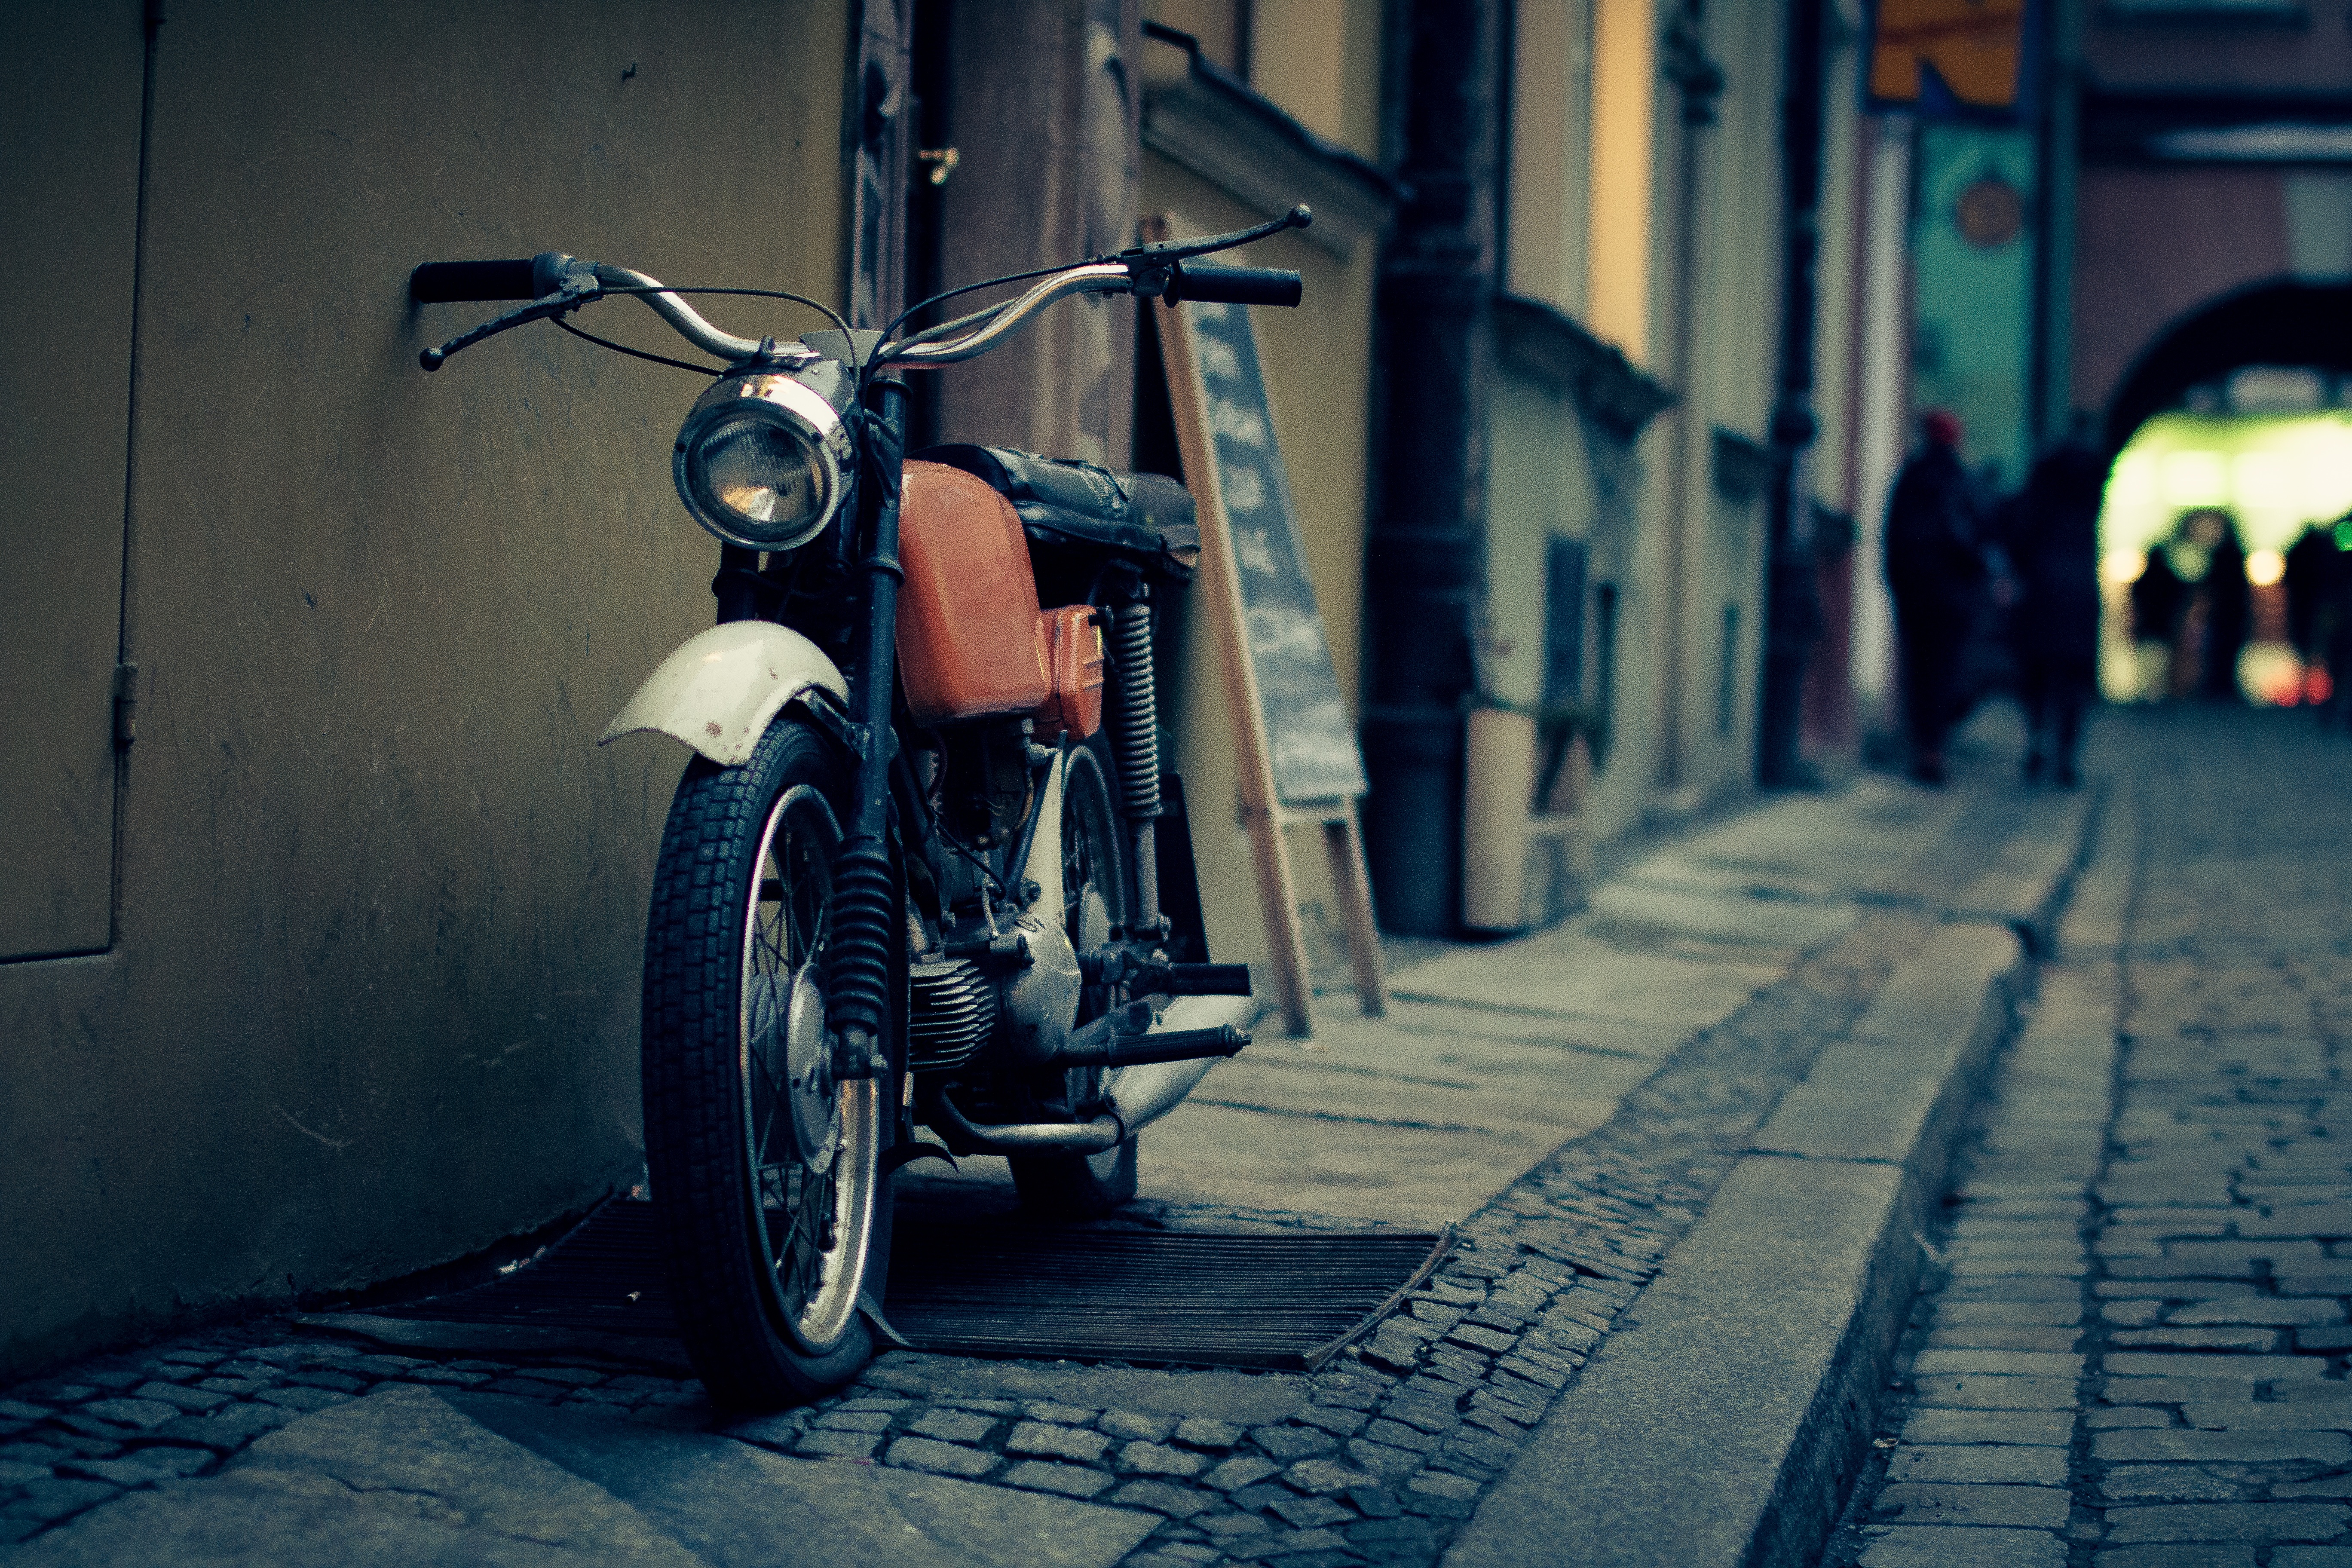 A vintage motorcycle on the streets of the city